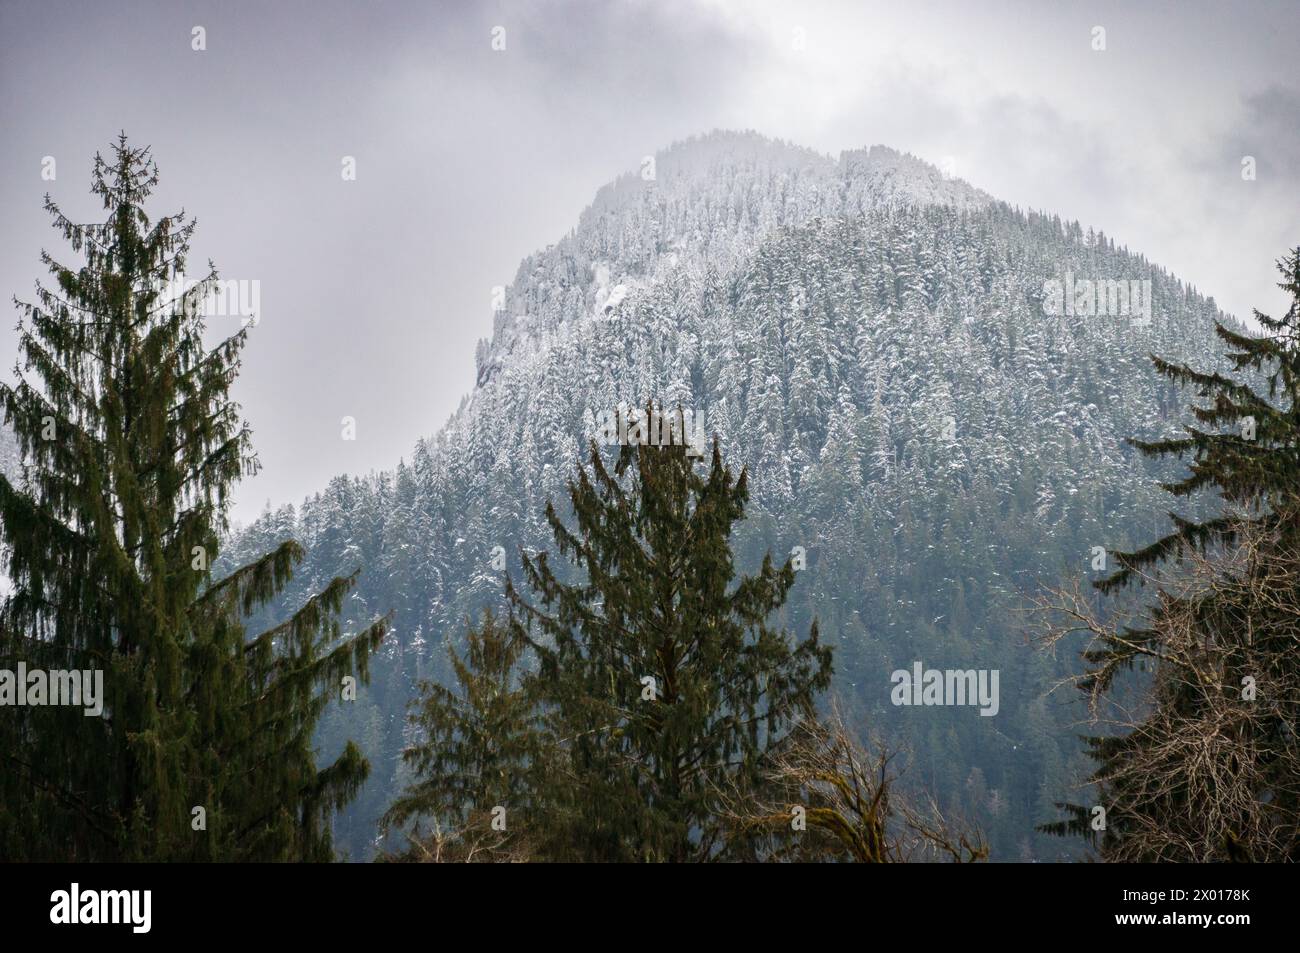 Snow Covered Forest Mountain View at Quinault Rainforest in Olympic National Park, Washington State, USA Stock Photo